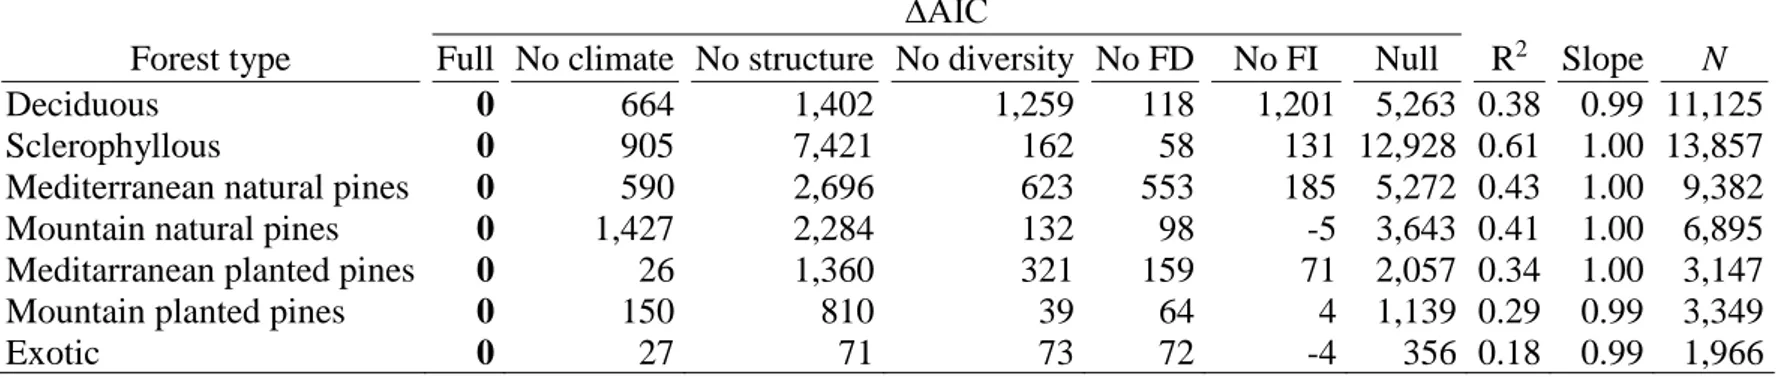 Table  1  Comparisons  of  alternate  models  of  carbon  storage  (Mg  C  ha -1 )  for  the  seven  forest  types  studied  using  Akaike  Information 712  Criterion (AIC)